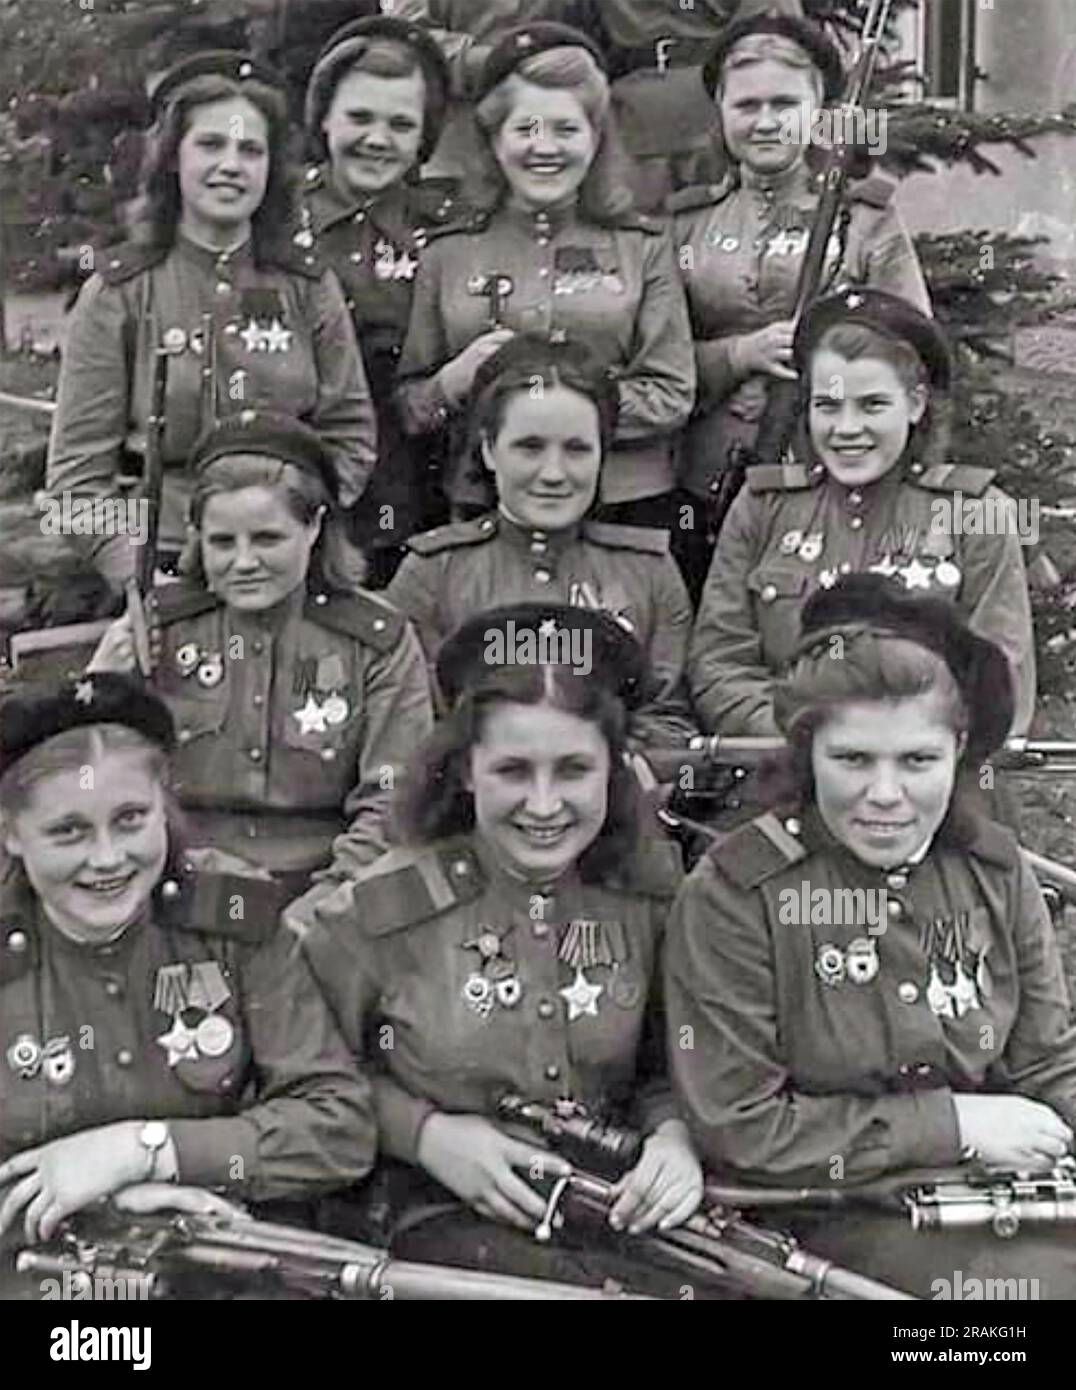 RUSSIAN ARMY FEMALE SNIPERS about 1944. Front row from left: Senior non-commissioned officer V.N. Stepanova ((20 kills), Senior non-commissioned officer Y.P. Belousova (80 kills), Senior non-commissioned officer  A.E.Vinogradova (83 kills). Photo: SIB Stock Photo